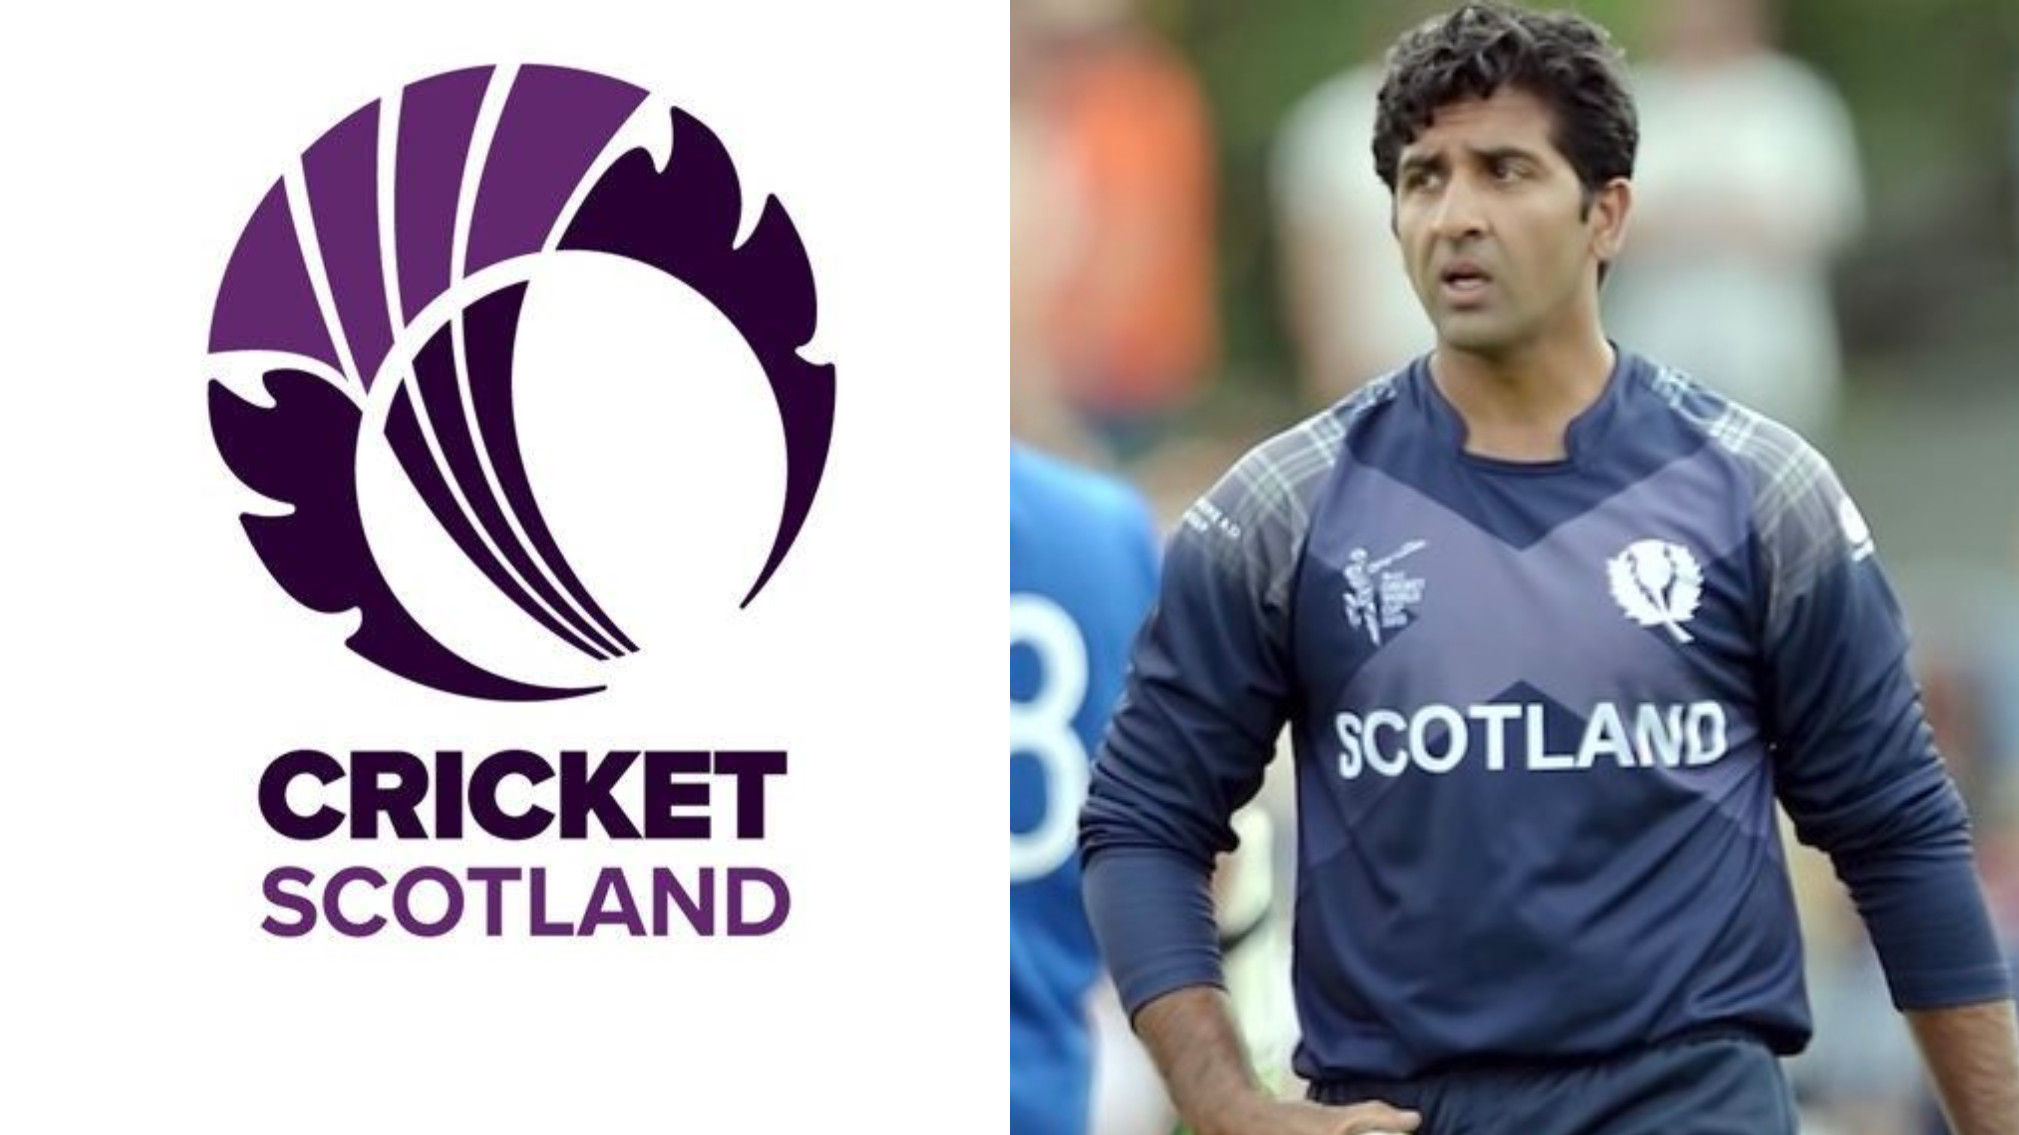 The entire board of Scotland Cricket resigns following racism claims